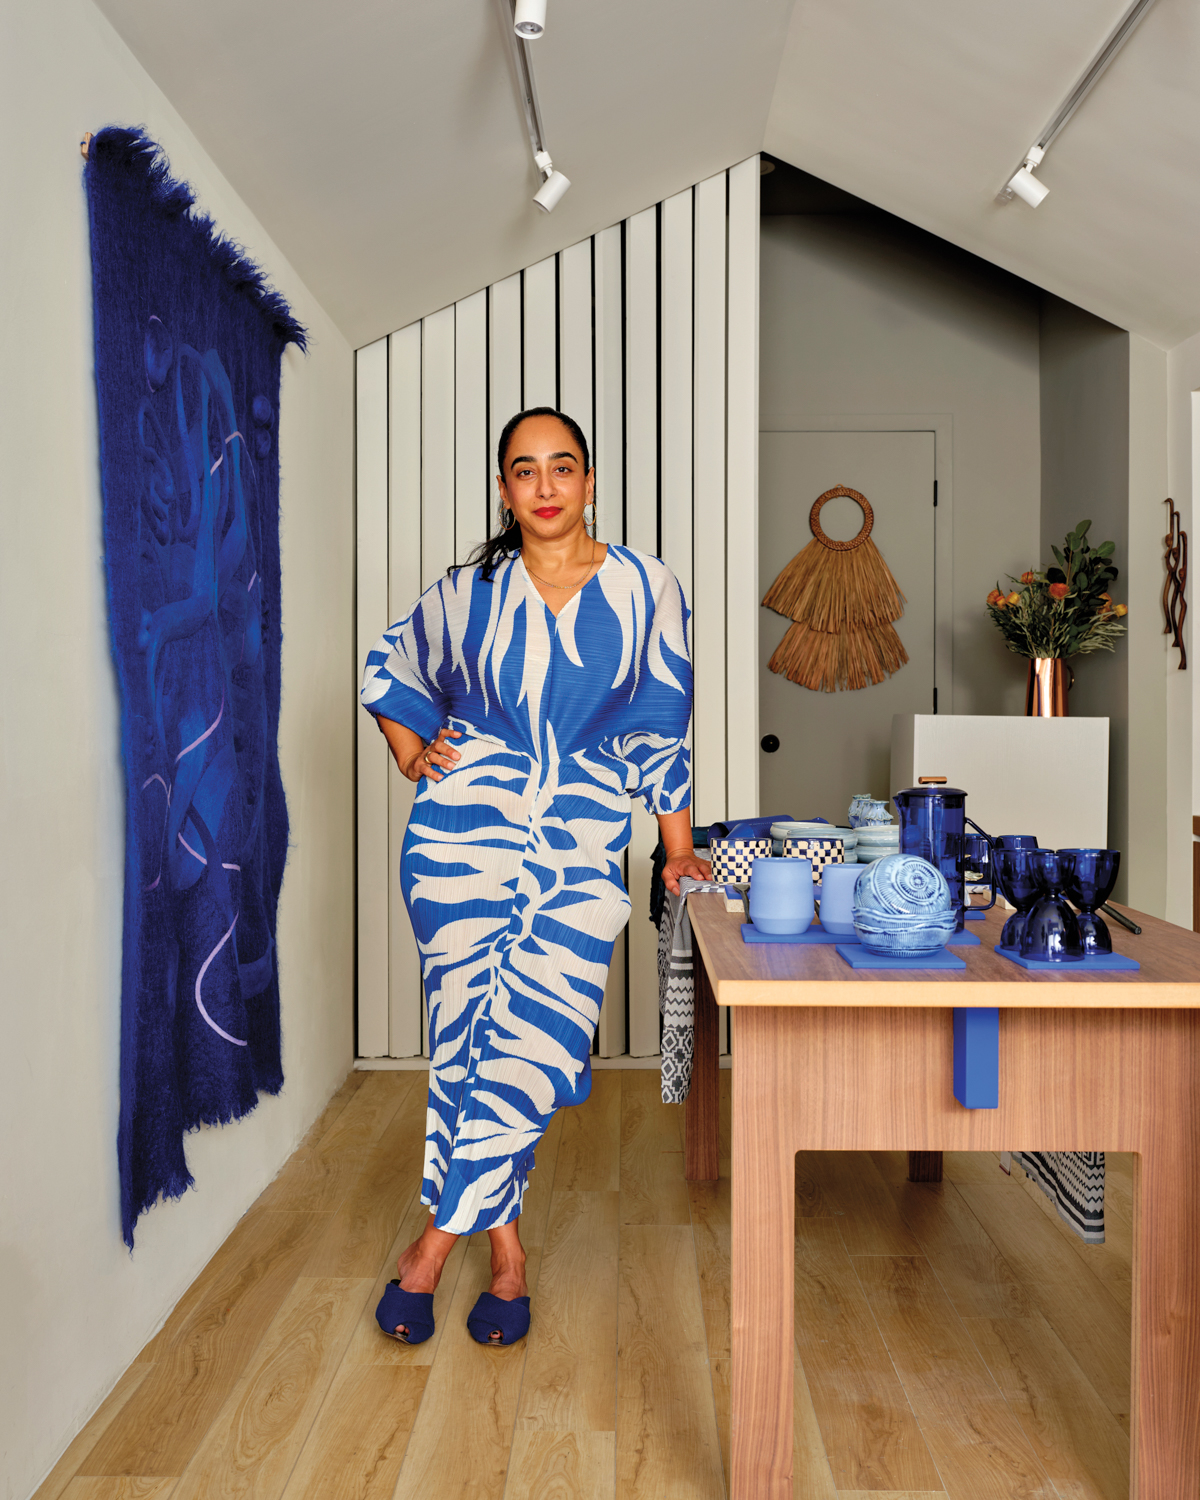 The Color Blue Is Central To This Design Pro’s New Boutique